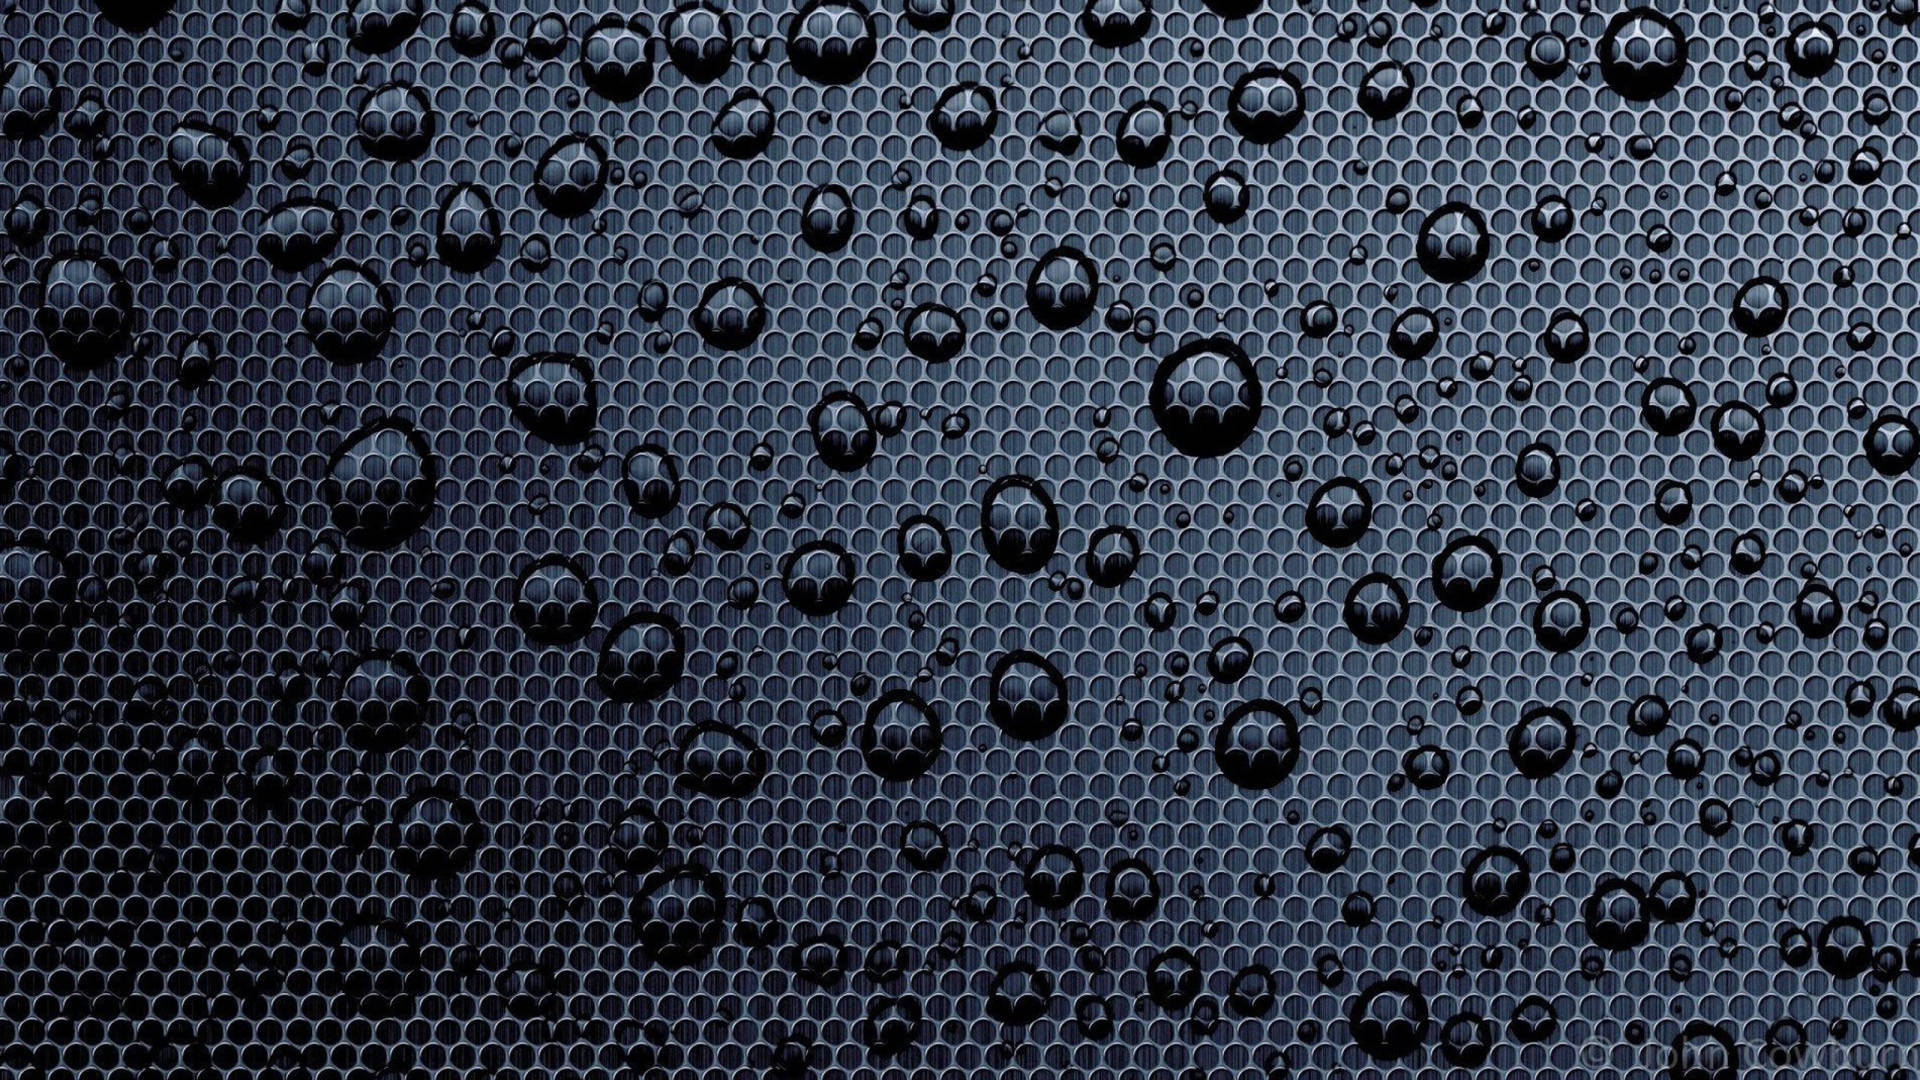 Gmail Clear Water Droplets Background